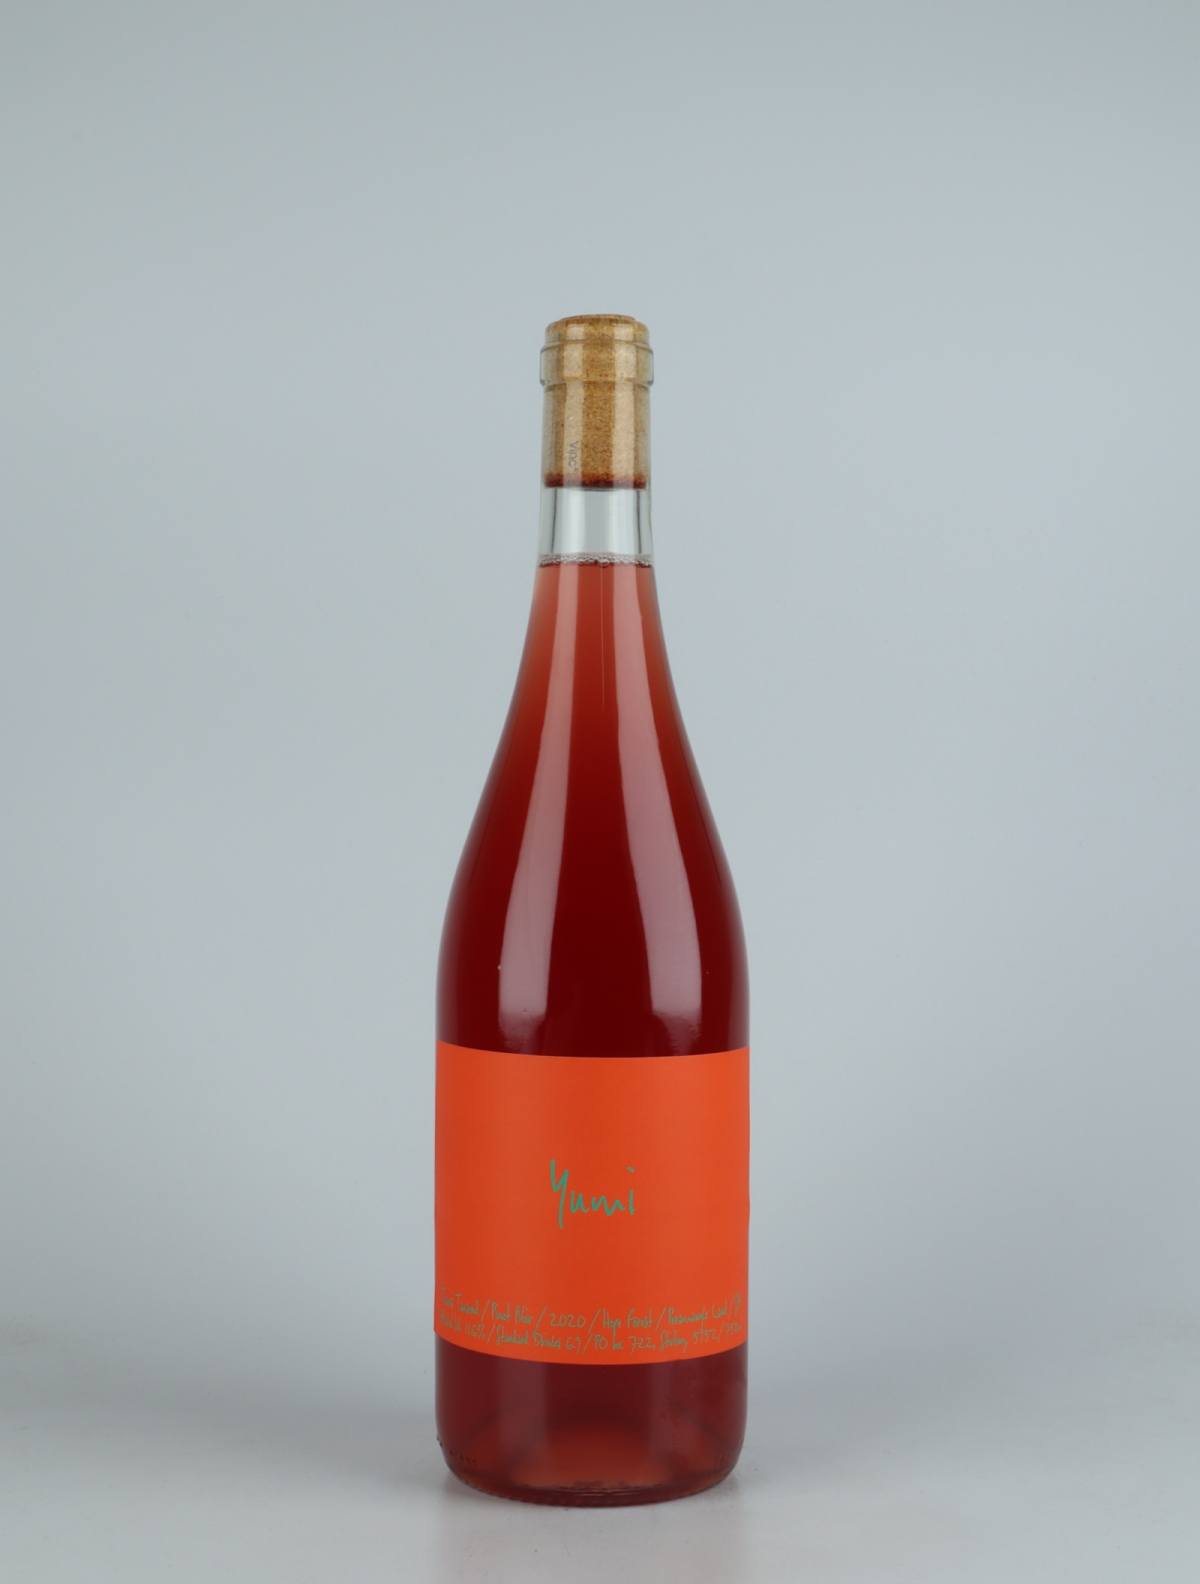 A bottle 2020 Yumi Pinot Noir Red wine from Travis Tausend, Adelaide Hills in 